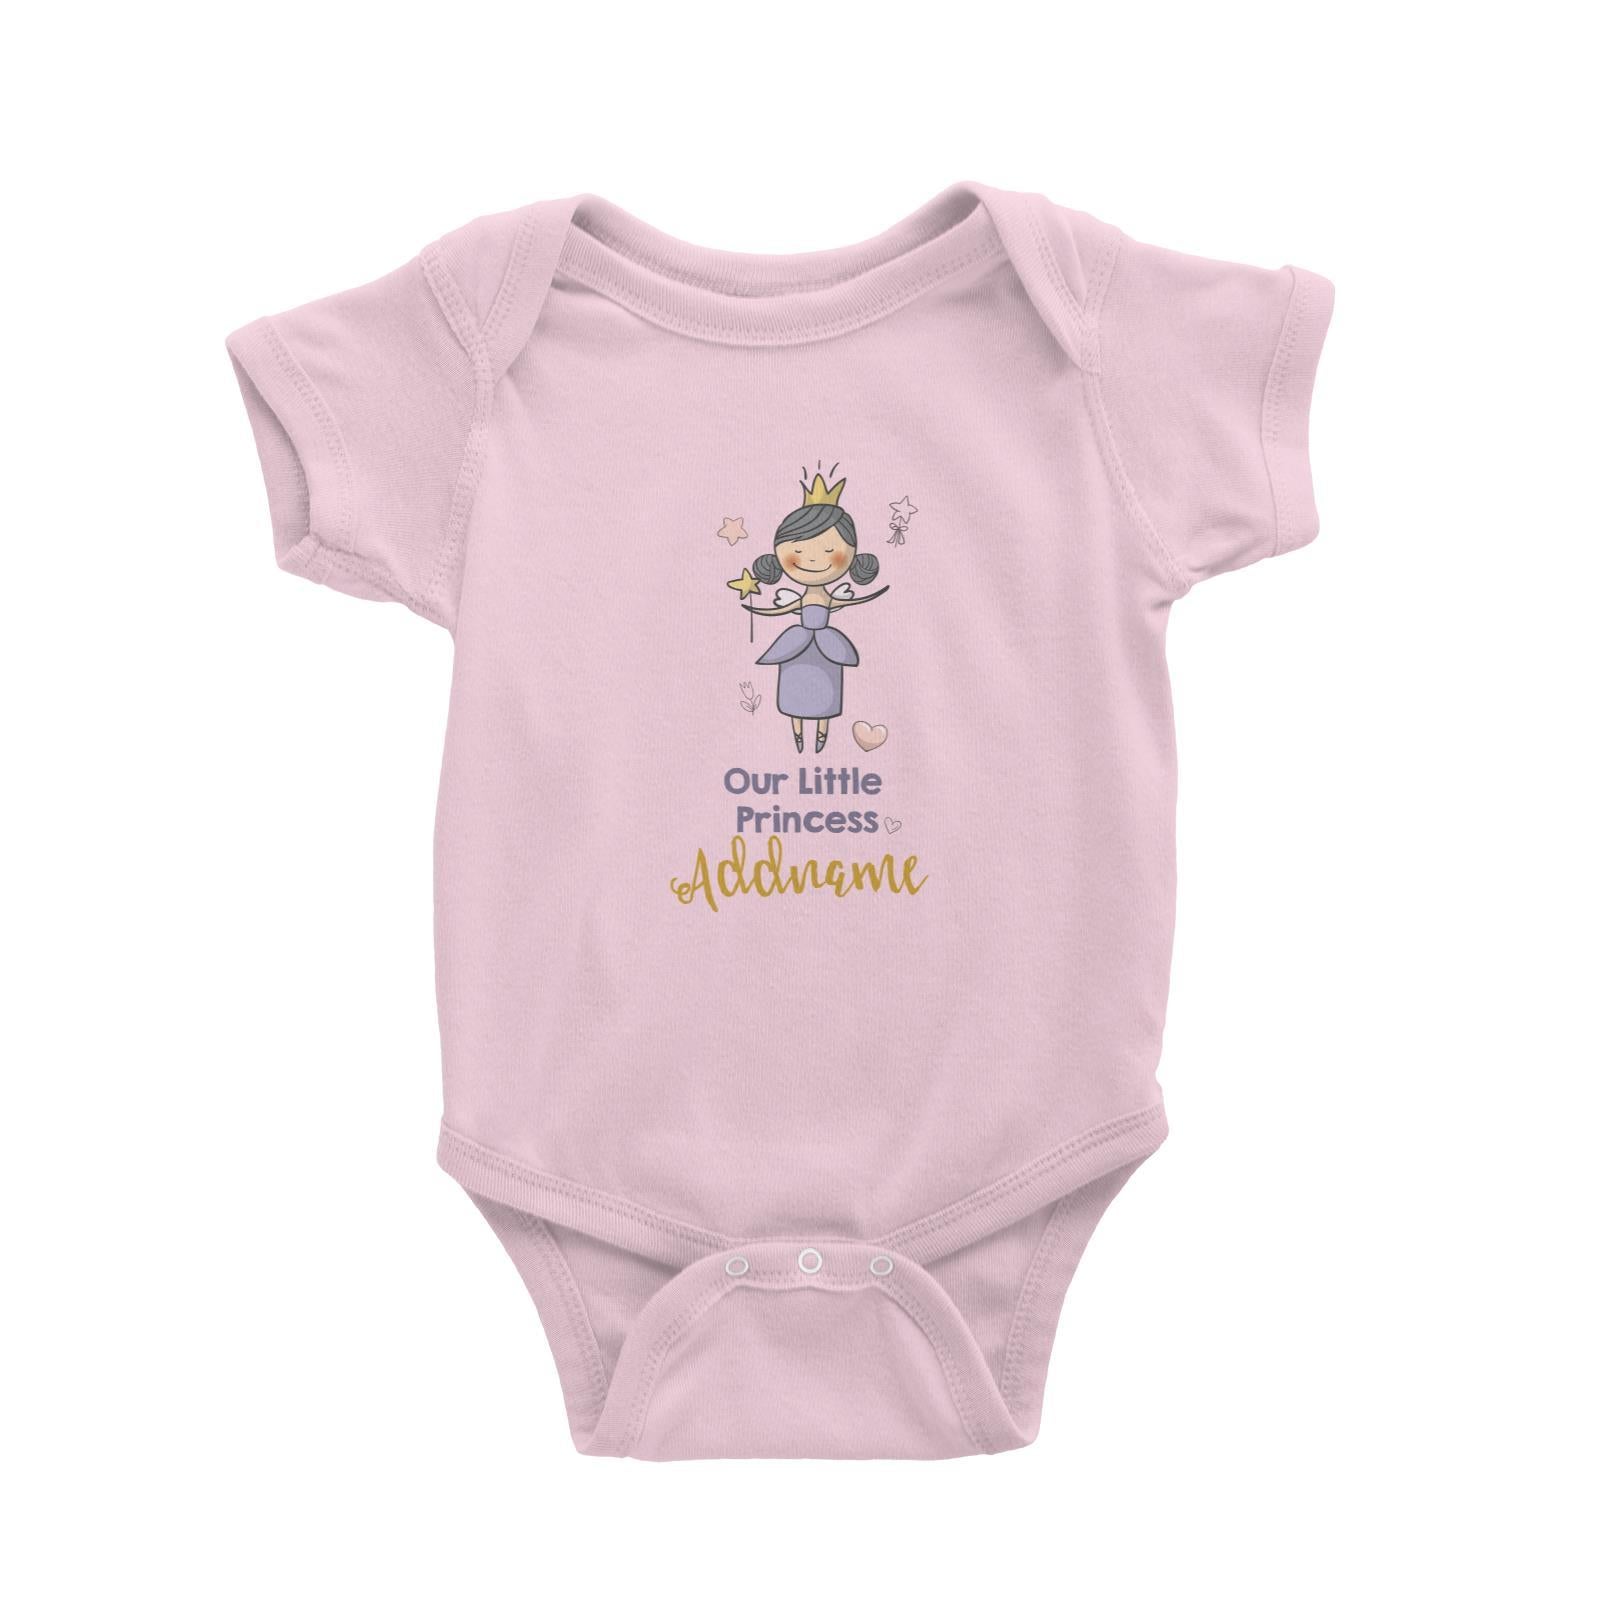 Our Little Princess in Purple Dress with Addname Baby Romper